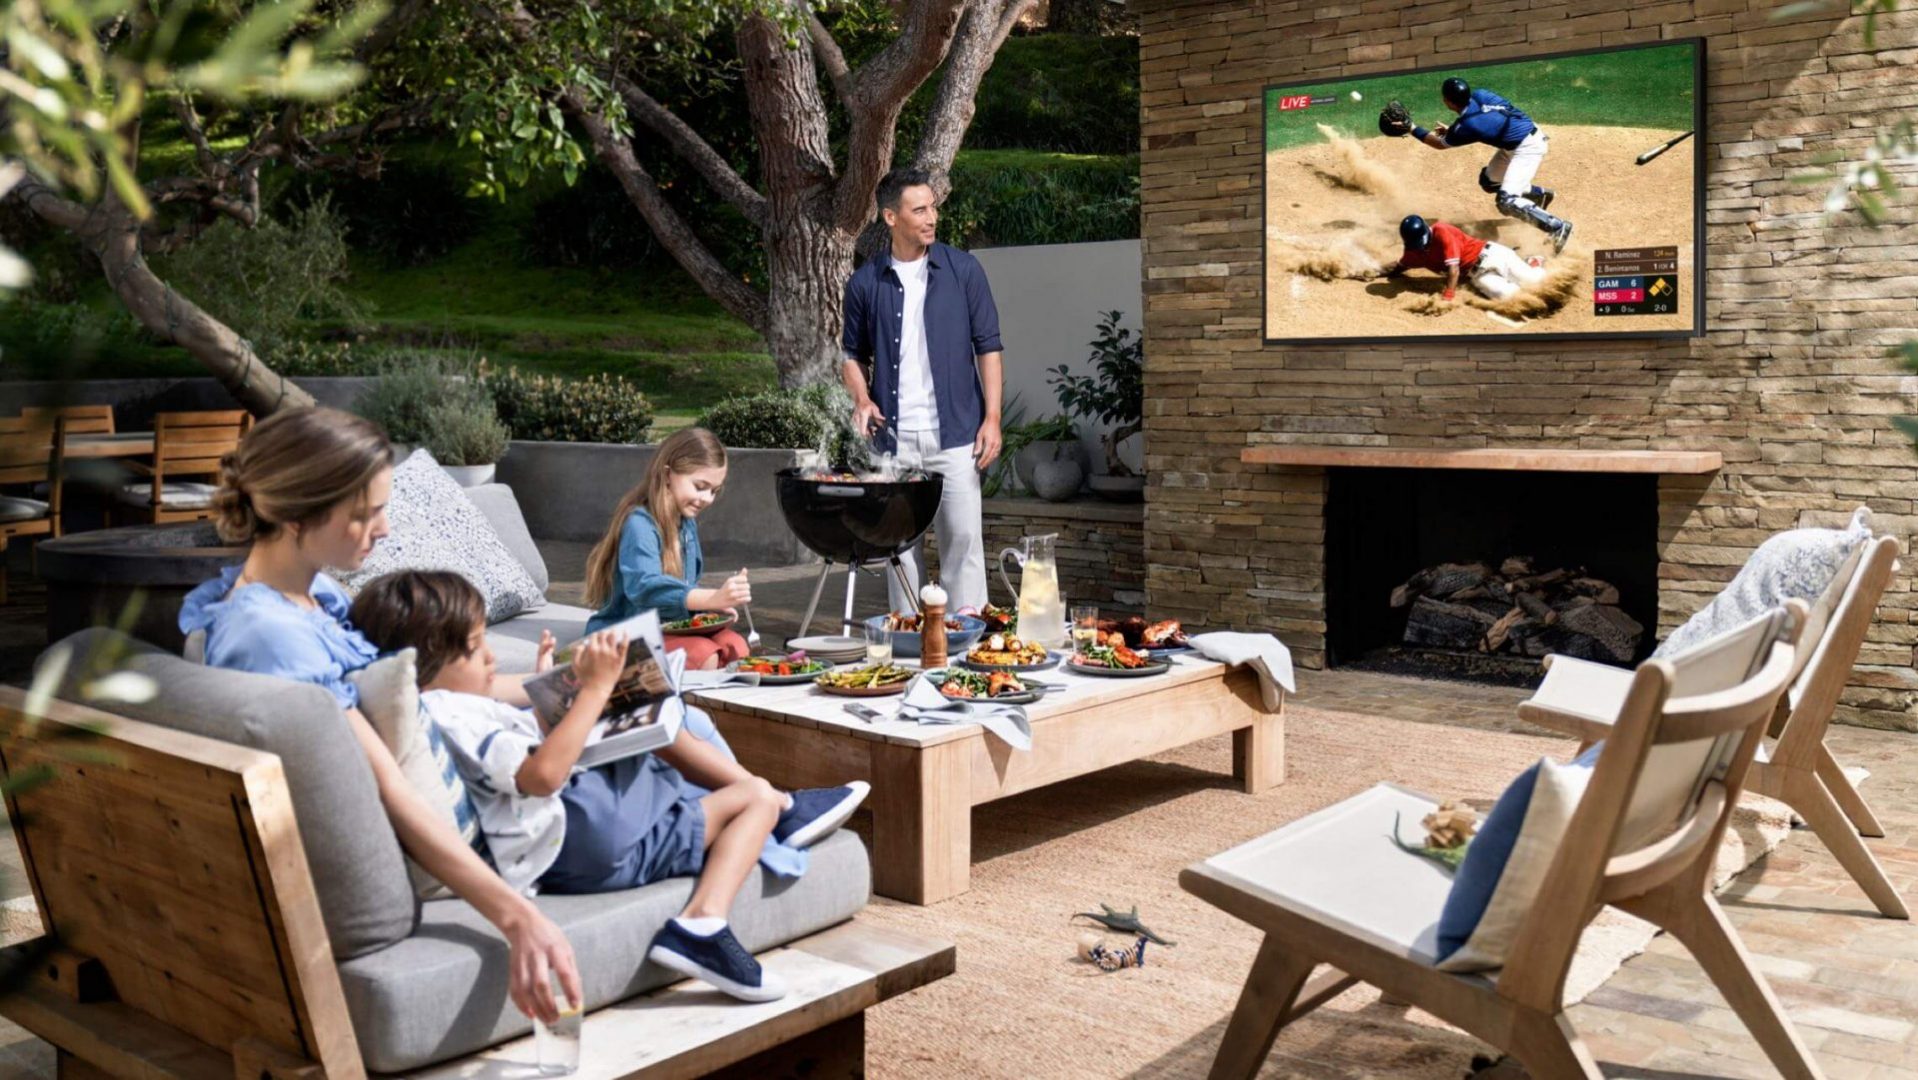 Weatherproof TV Perfect For Outdoor Entertainment